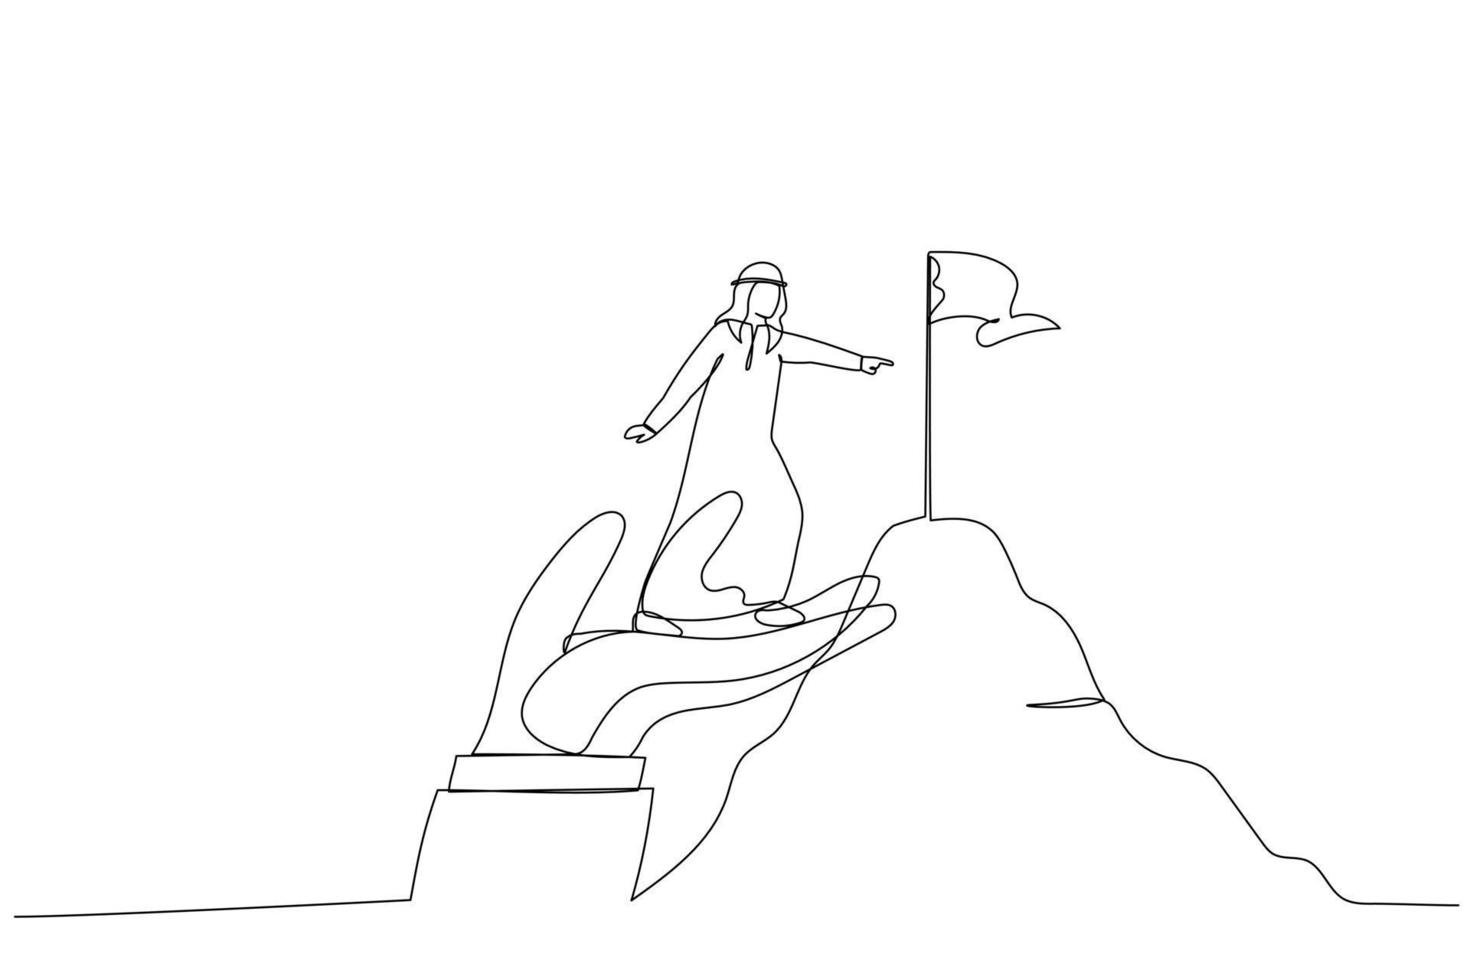 Illustration of arabian businessman stand on giant helping hand to reach mountain peak target flag.  One continuous line art style vector